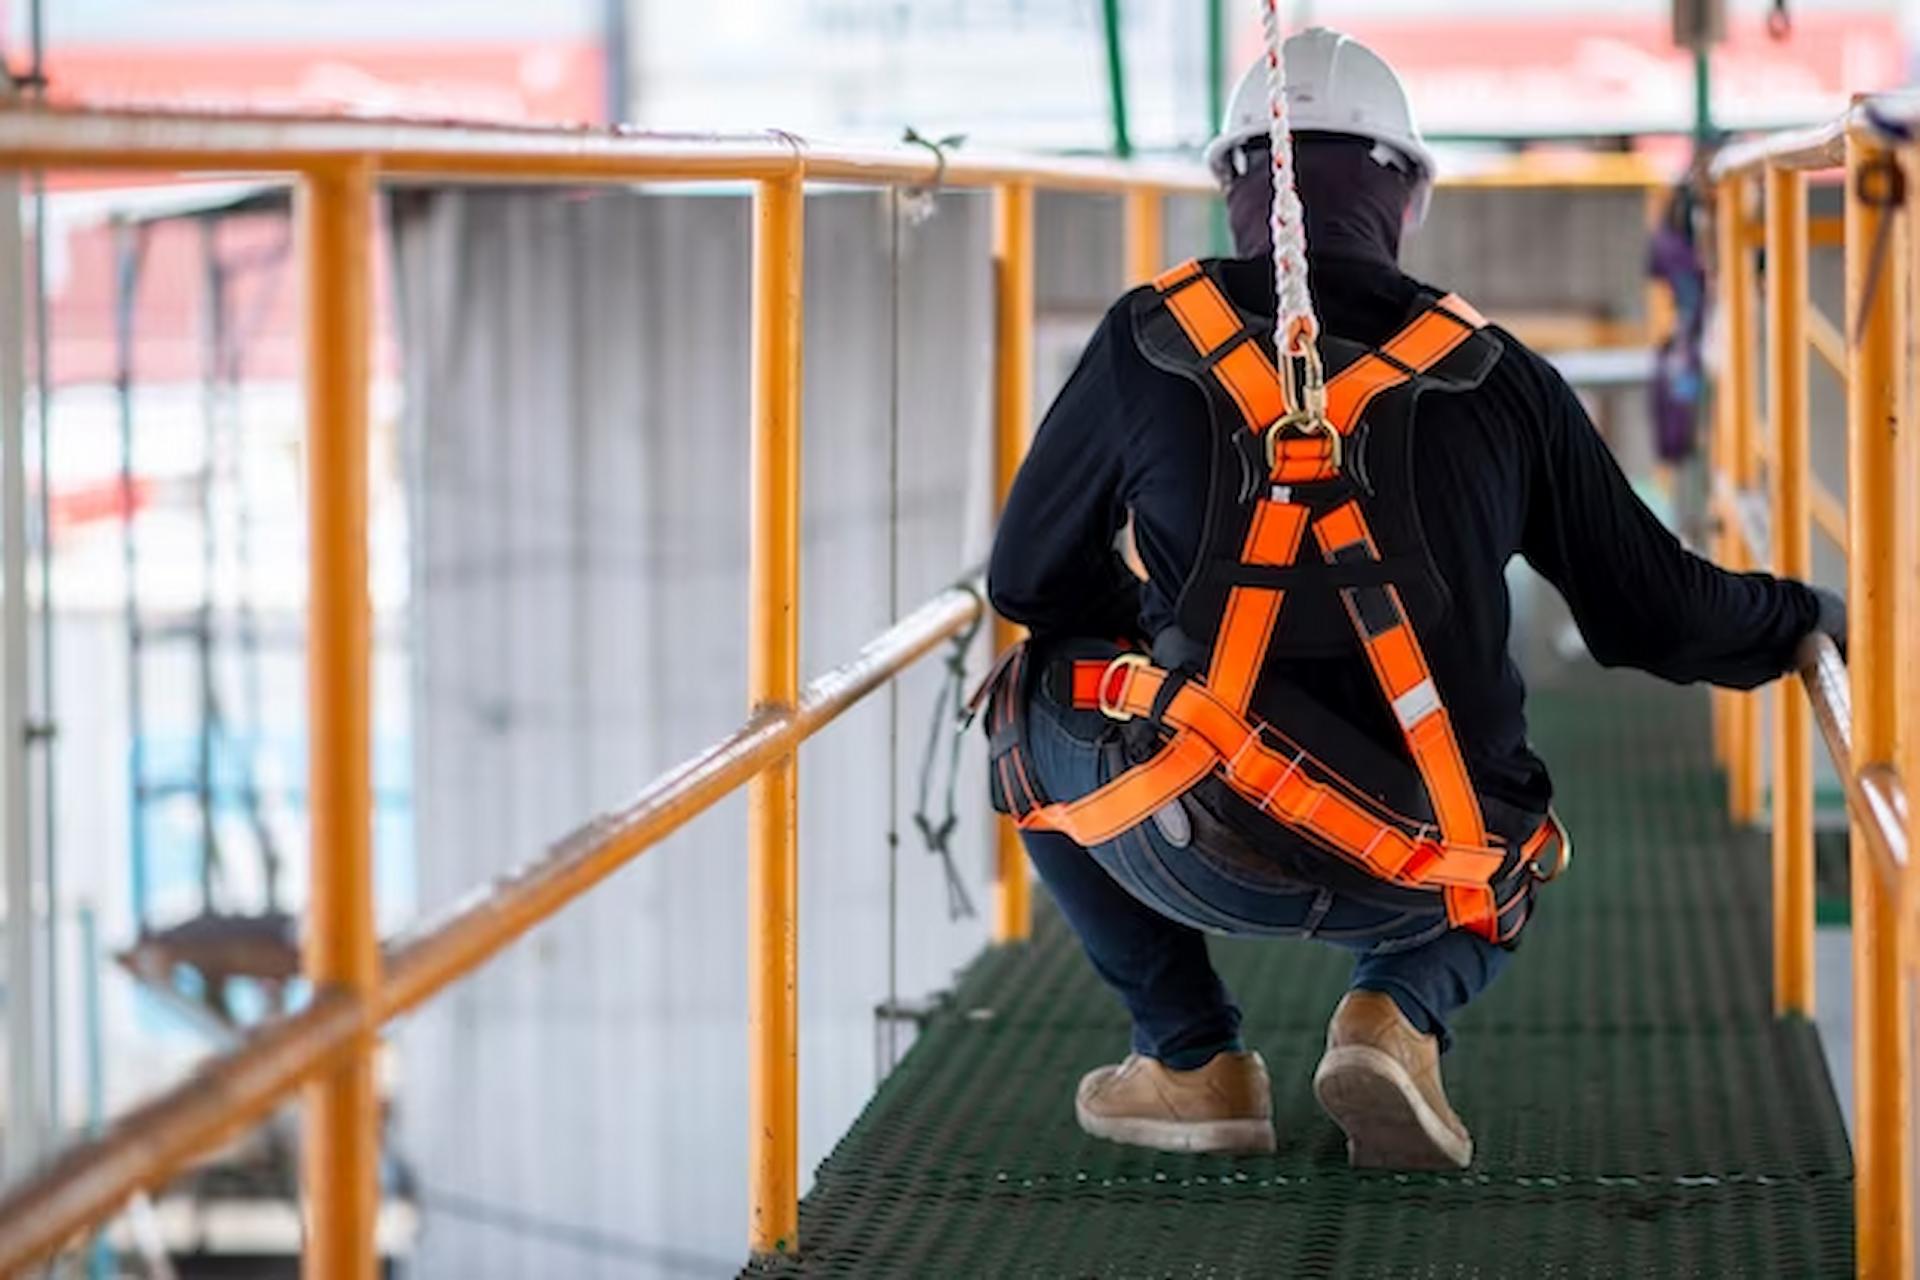 Jason Wible Frenchcreek Suggests To Consider Five Factors While Choosing Safety Harness